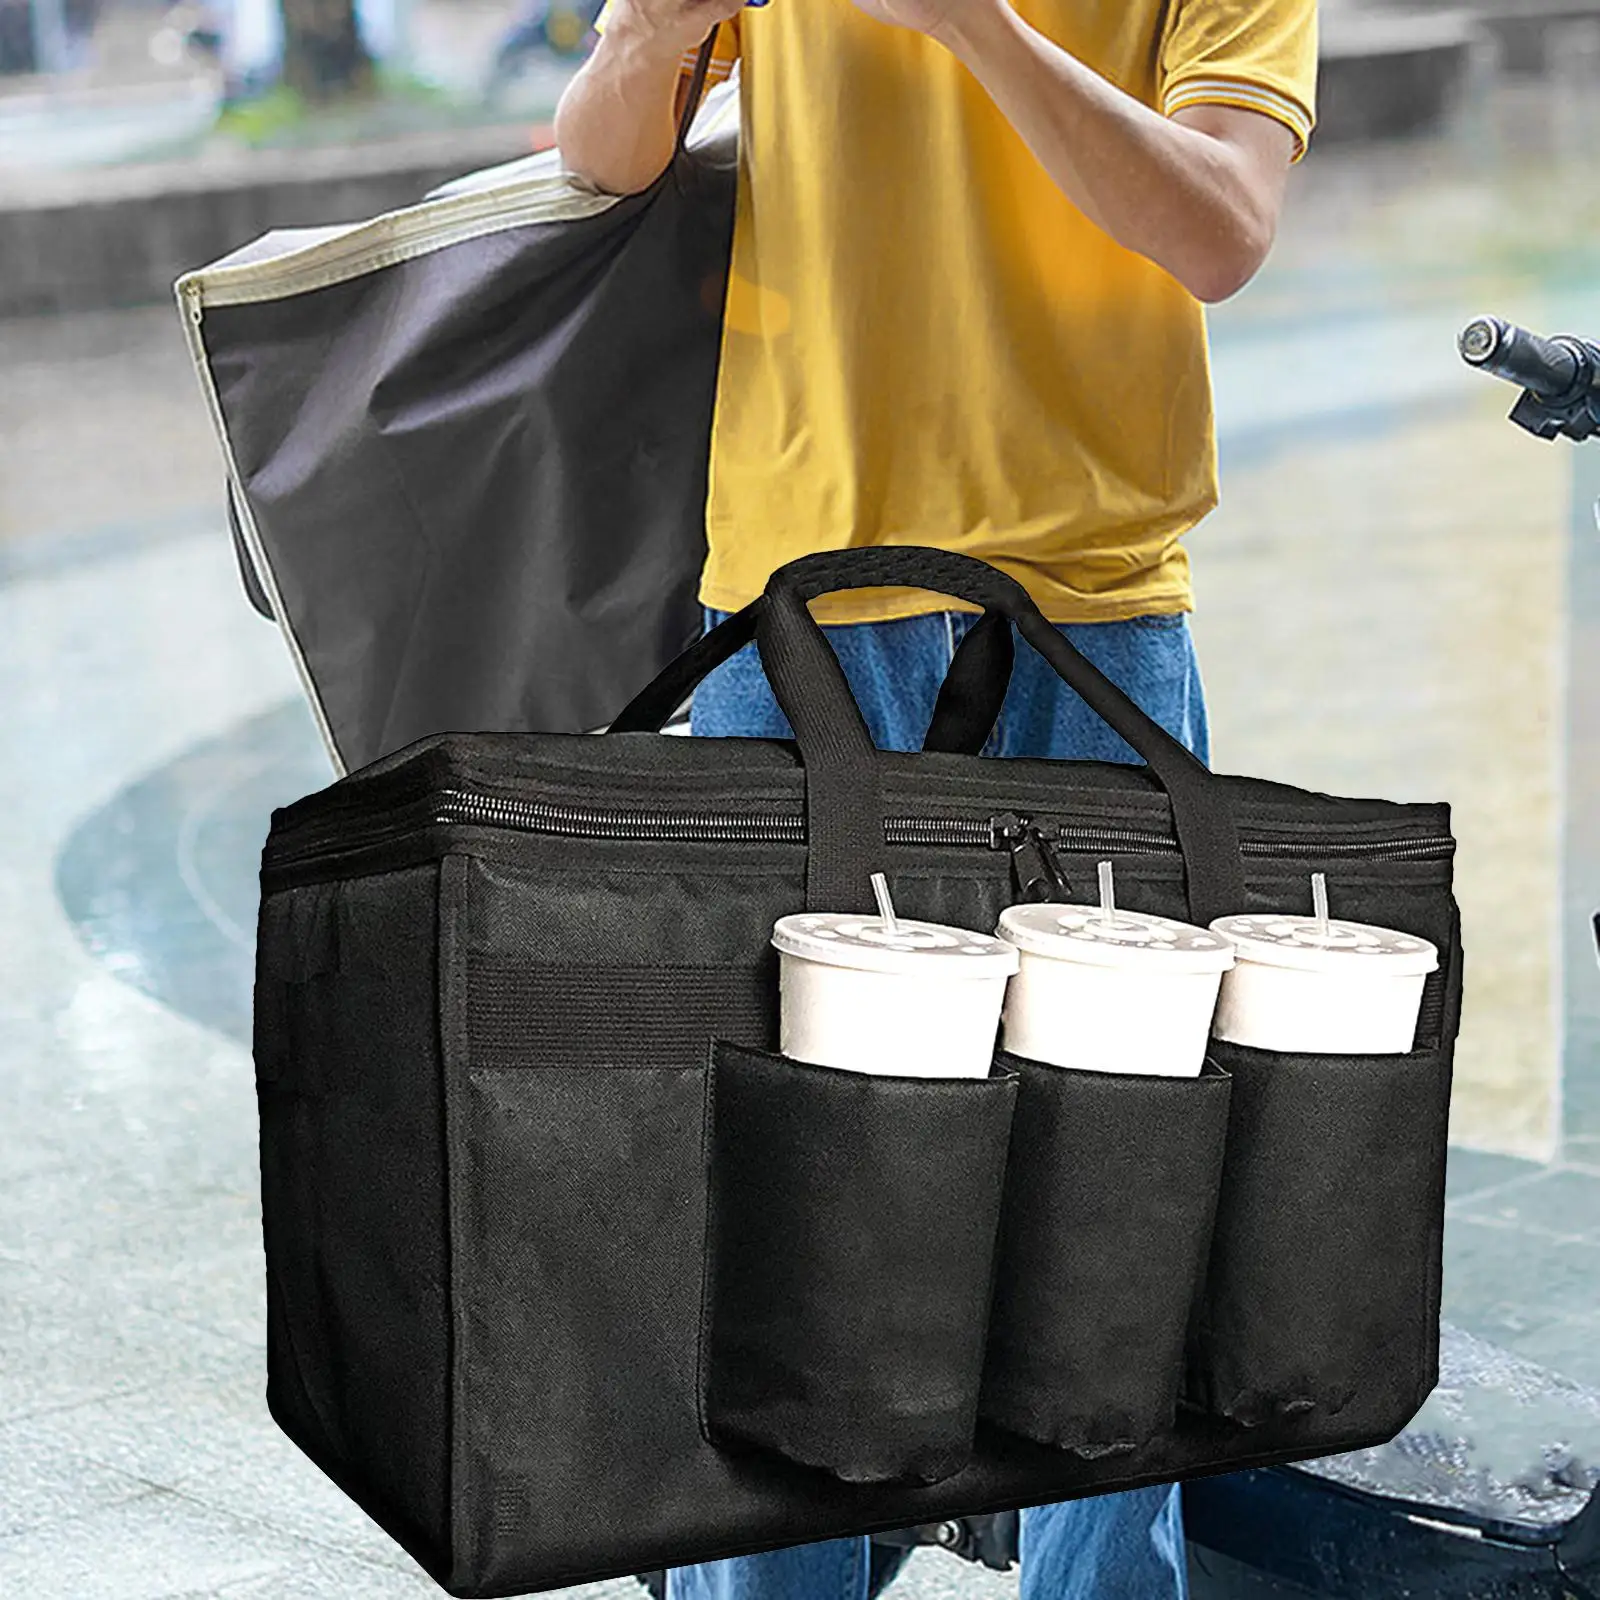 Insulated Food Delivery Bag Thickened Lightweight Portable Thermal Food Delivery Bag for Home Catering Shopping Camping Personal